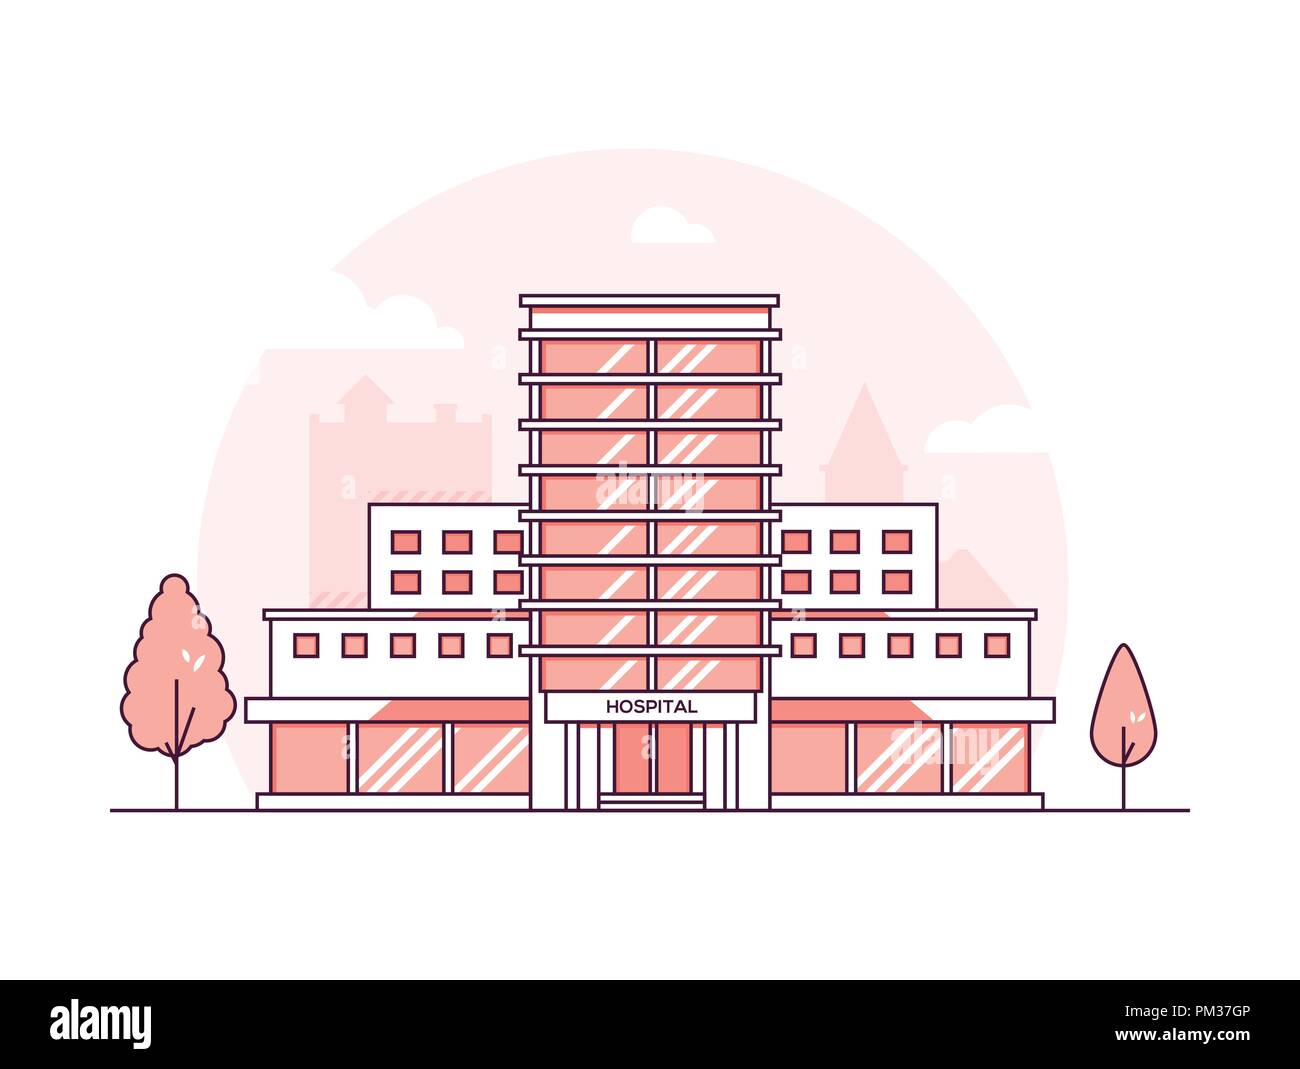 Hospital building - modern thin line design style vector illustration on white urban background. Red colored high quality composition with facade of m Stock Vector